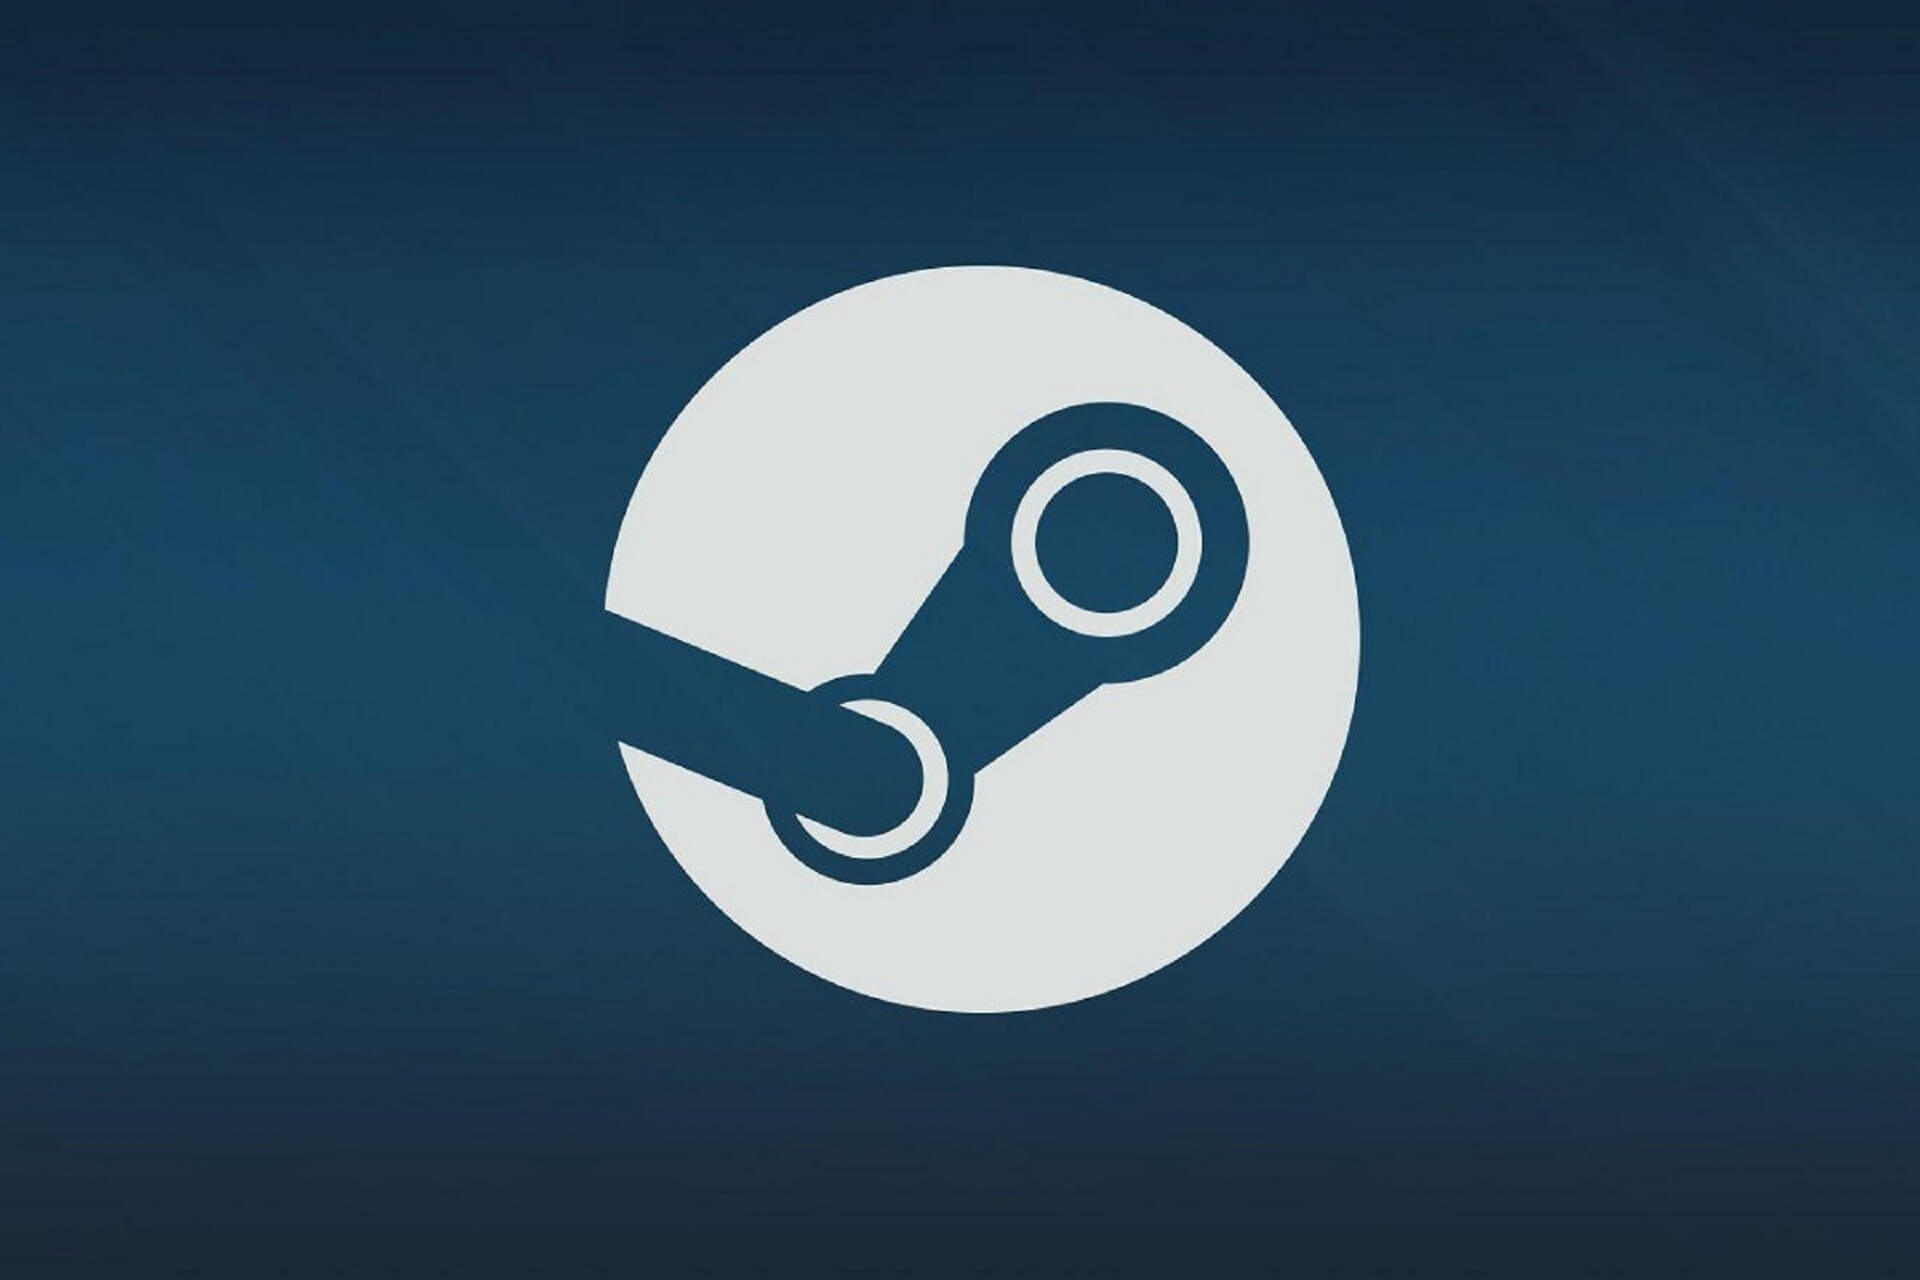 Steam Cleaner clears temporary data and duplicate files